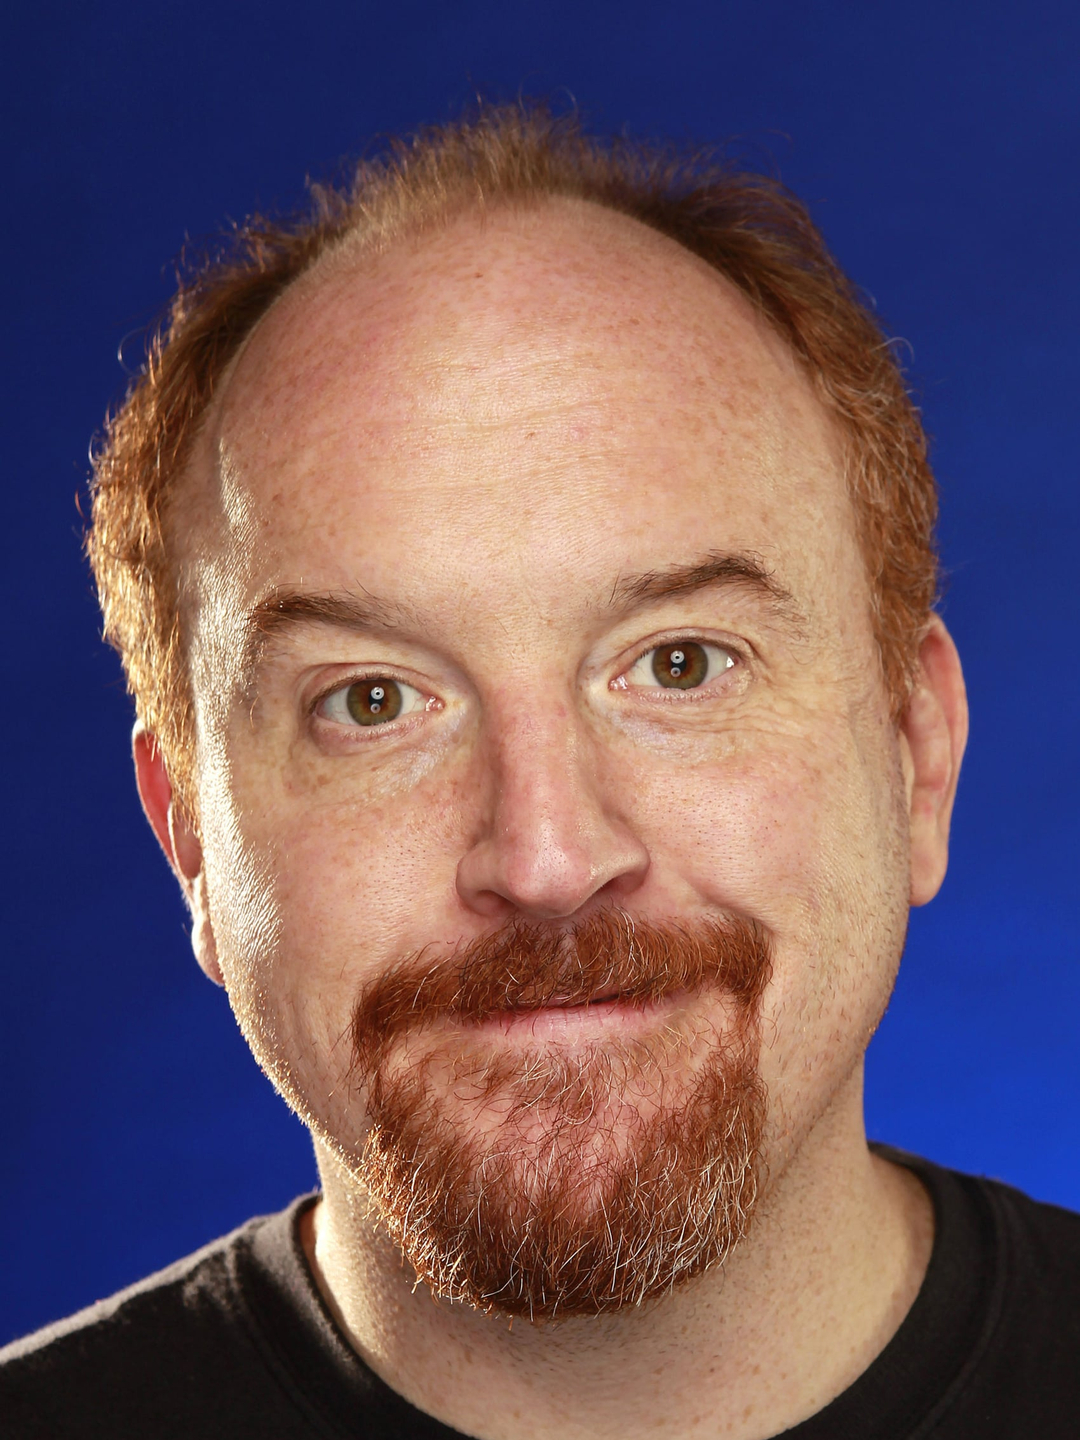 Louis C.K. young age